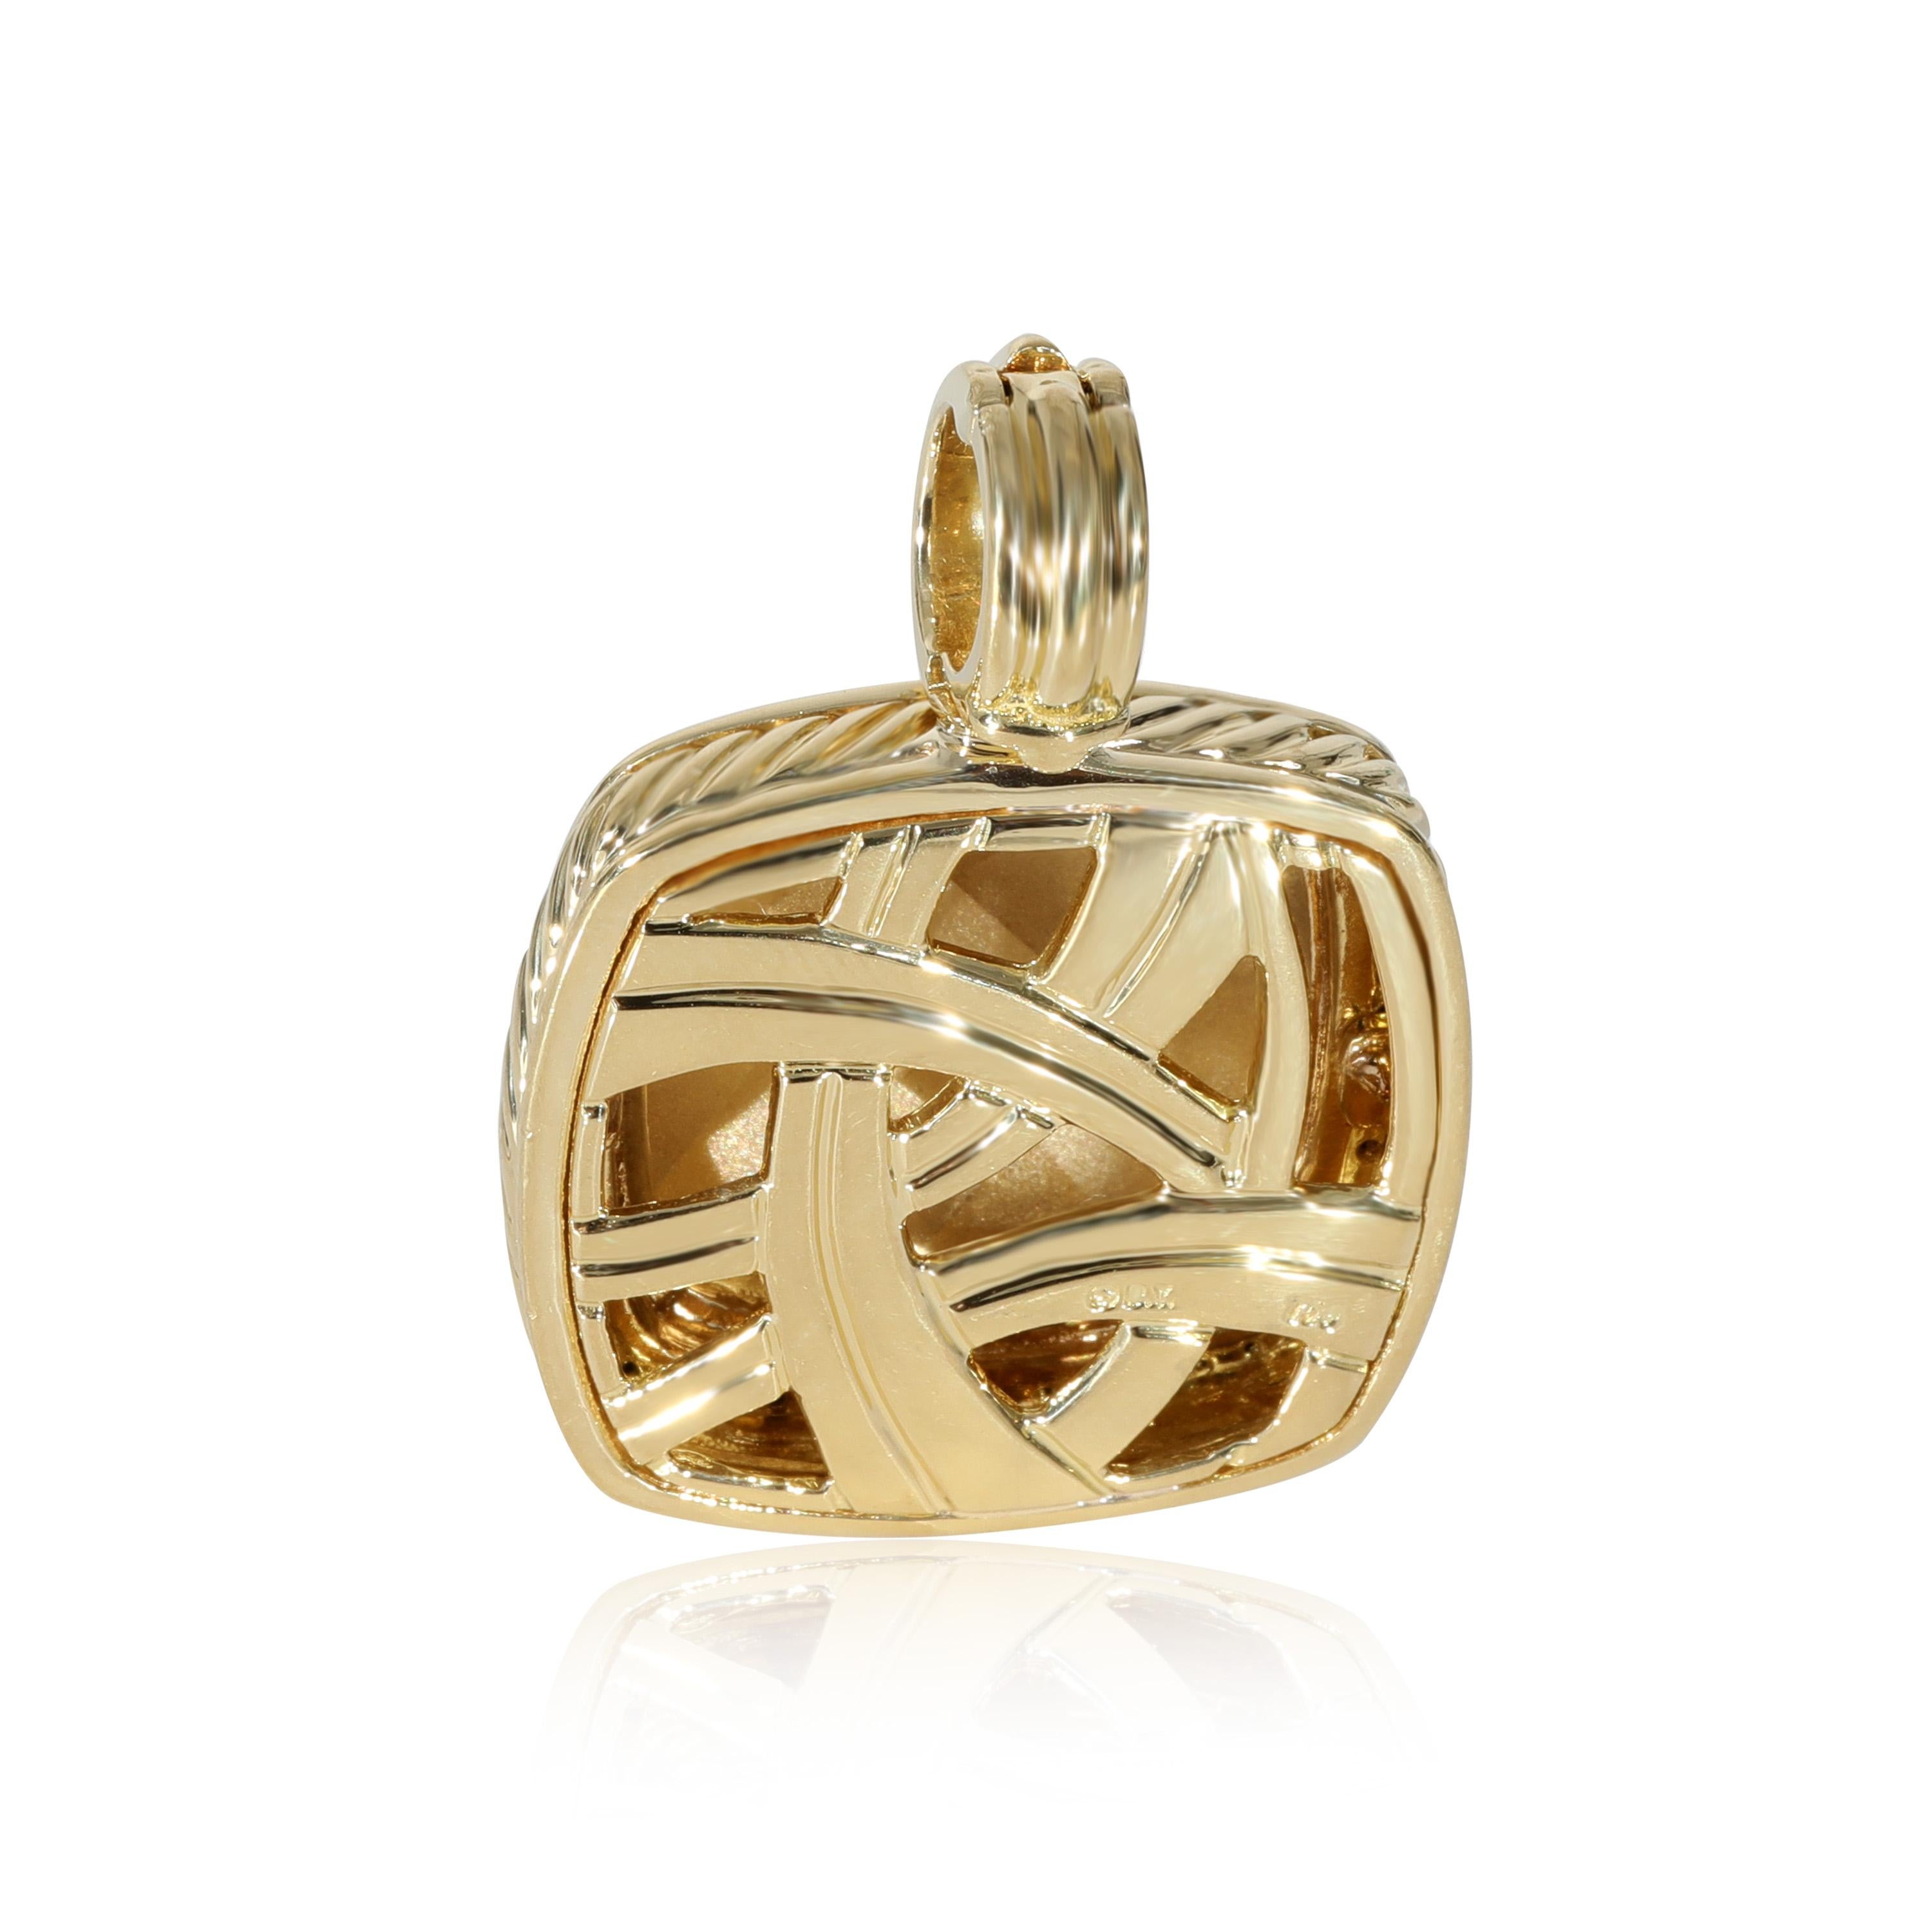 David Yurman Albion Black Diamond Pendant in 18k Yellow Gold 0.5 CTW

PRIMARY DETAILS
SKU: 130485
Listing Title: David Yurman Albion Black Diamond Pendant in 18k Yellow Gold 0.5 CTW
Condition Description: Introduced in 1994 and one of the most